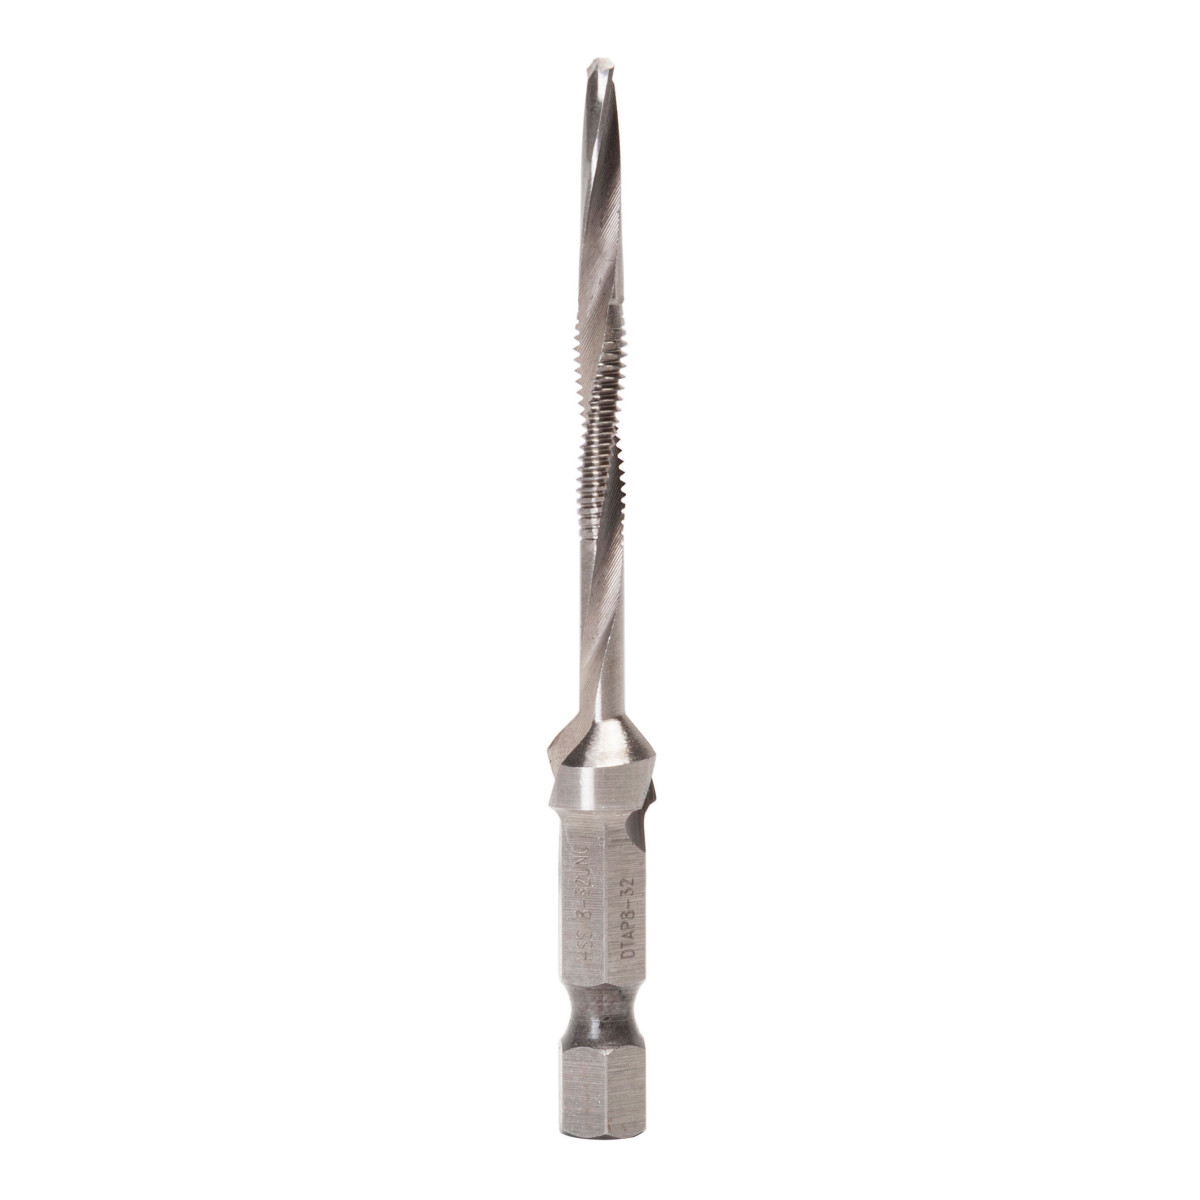 8-32NF Combination Drill Tap Bits.  Drill, Tap, and Countersink in one easy to use bit.  Tap holes up to 4X's faster than traditional methods.  One-piece Drill/Tap design ensures proper hole size for threaded tap size.  Available kit and individual bits in 8-32NC, 10-32NF, and 1/4-20NC thread sizes.  Constructed of hardened High Speed Steel.  Long length Drill/Tap Bits tap up to 1/2" (12.7 mm) thick material.  Split-tip drills fast and resists walking.  Back tapered beyond tap to prevent thread damage.  Quickly deburrs and counter sinks threaded hole.  Fast, secure 1/4" Quick-Change hex shank.  Quick-Change adapter included in Standard Length, Long Length, and Metric Drill/Tap Kits.  For best results, use Greenlee cutting oil with all Drill/Tap bits.